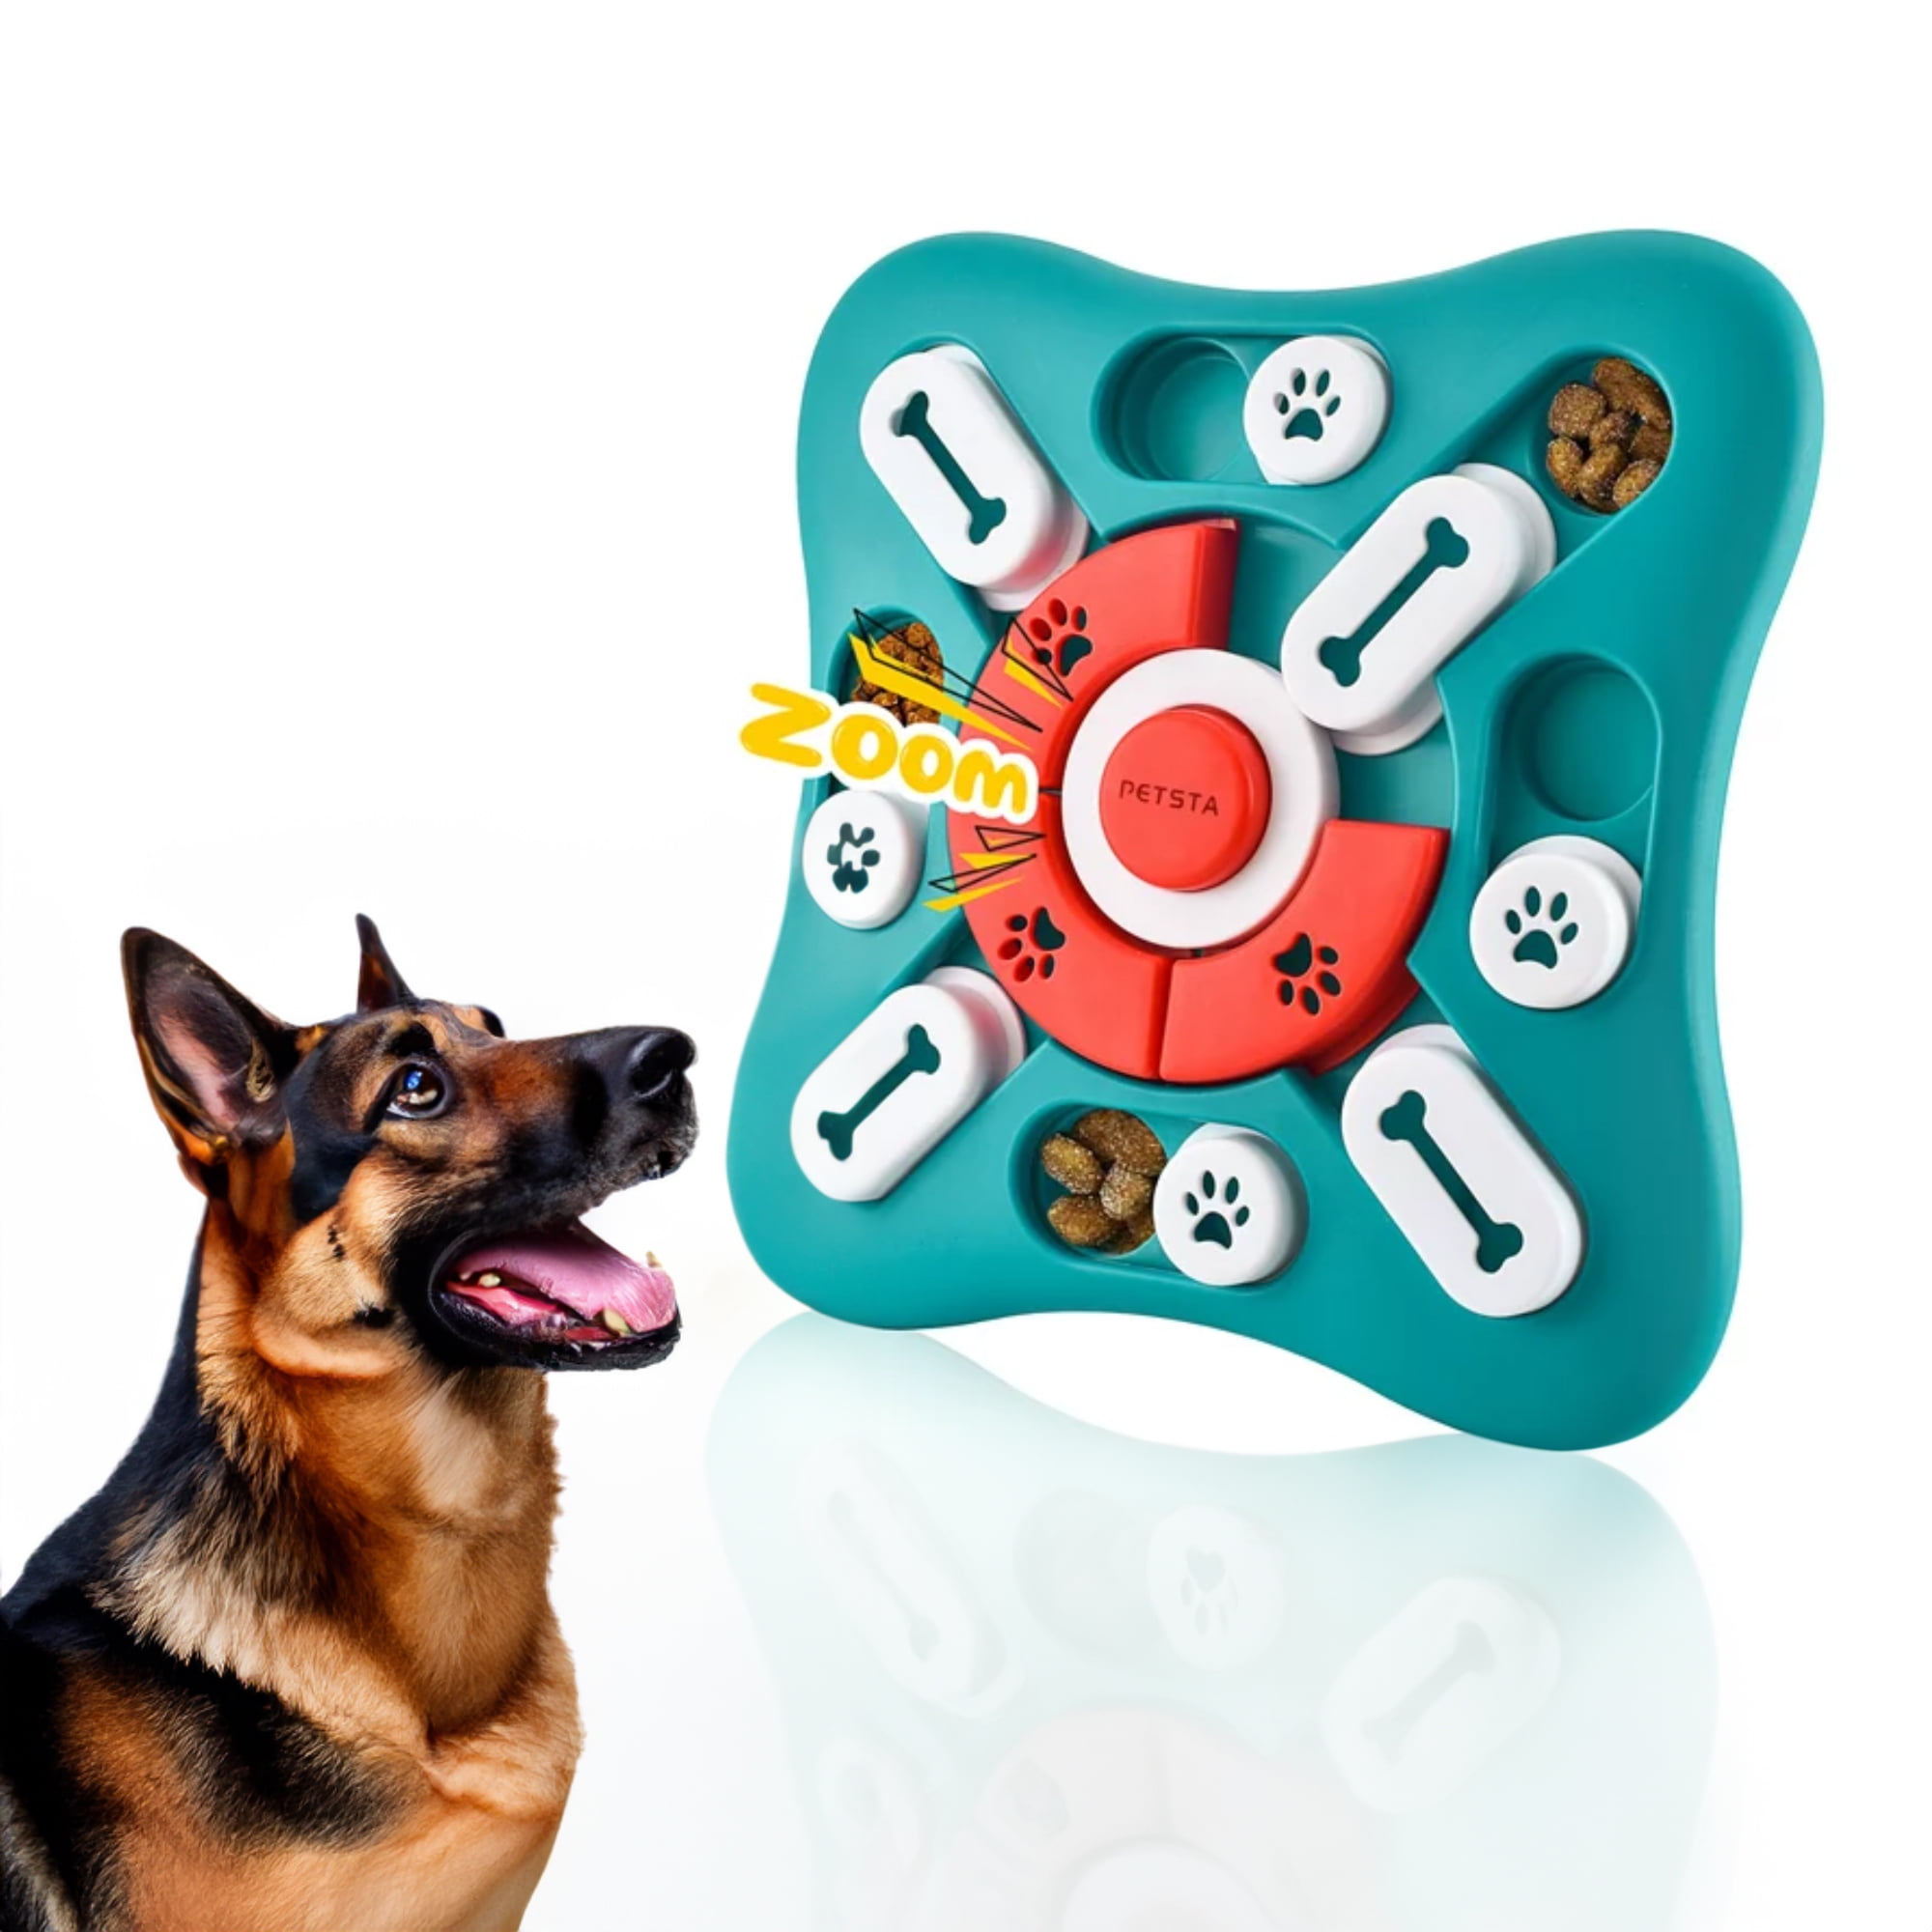 Dog Puzzle Toys, Dog Treat Puzzle for Puppy IQ Stimulation Training Dog  Games Treat Dispenser for Smart Dogs, ABS Colorful Design Slow Feeder to  Aid P for Sale in San Juan, TX 